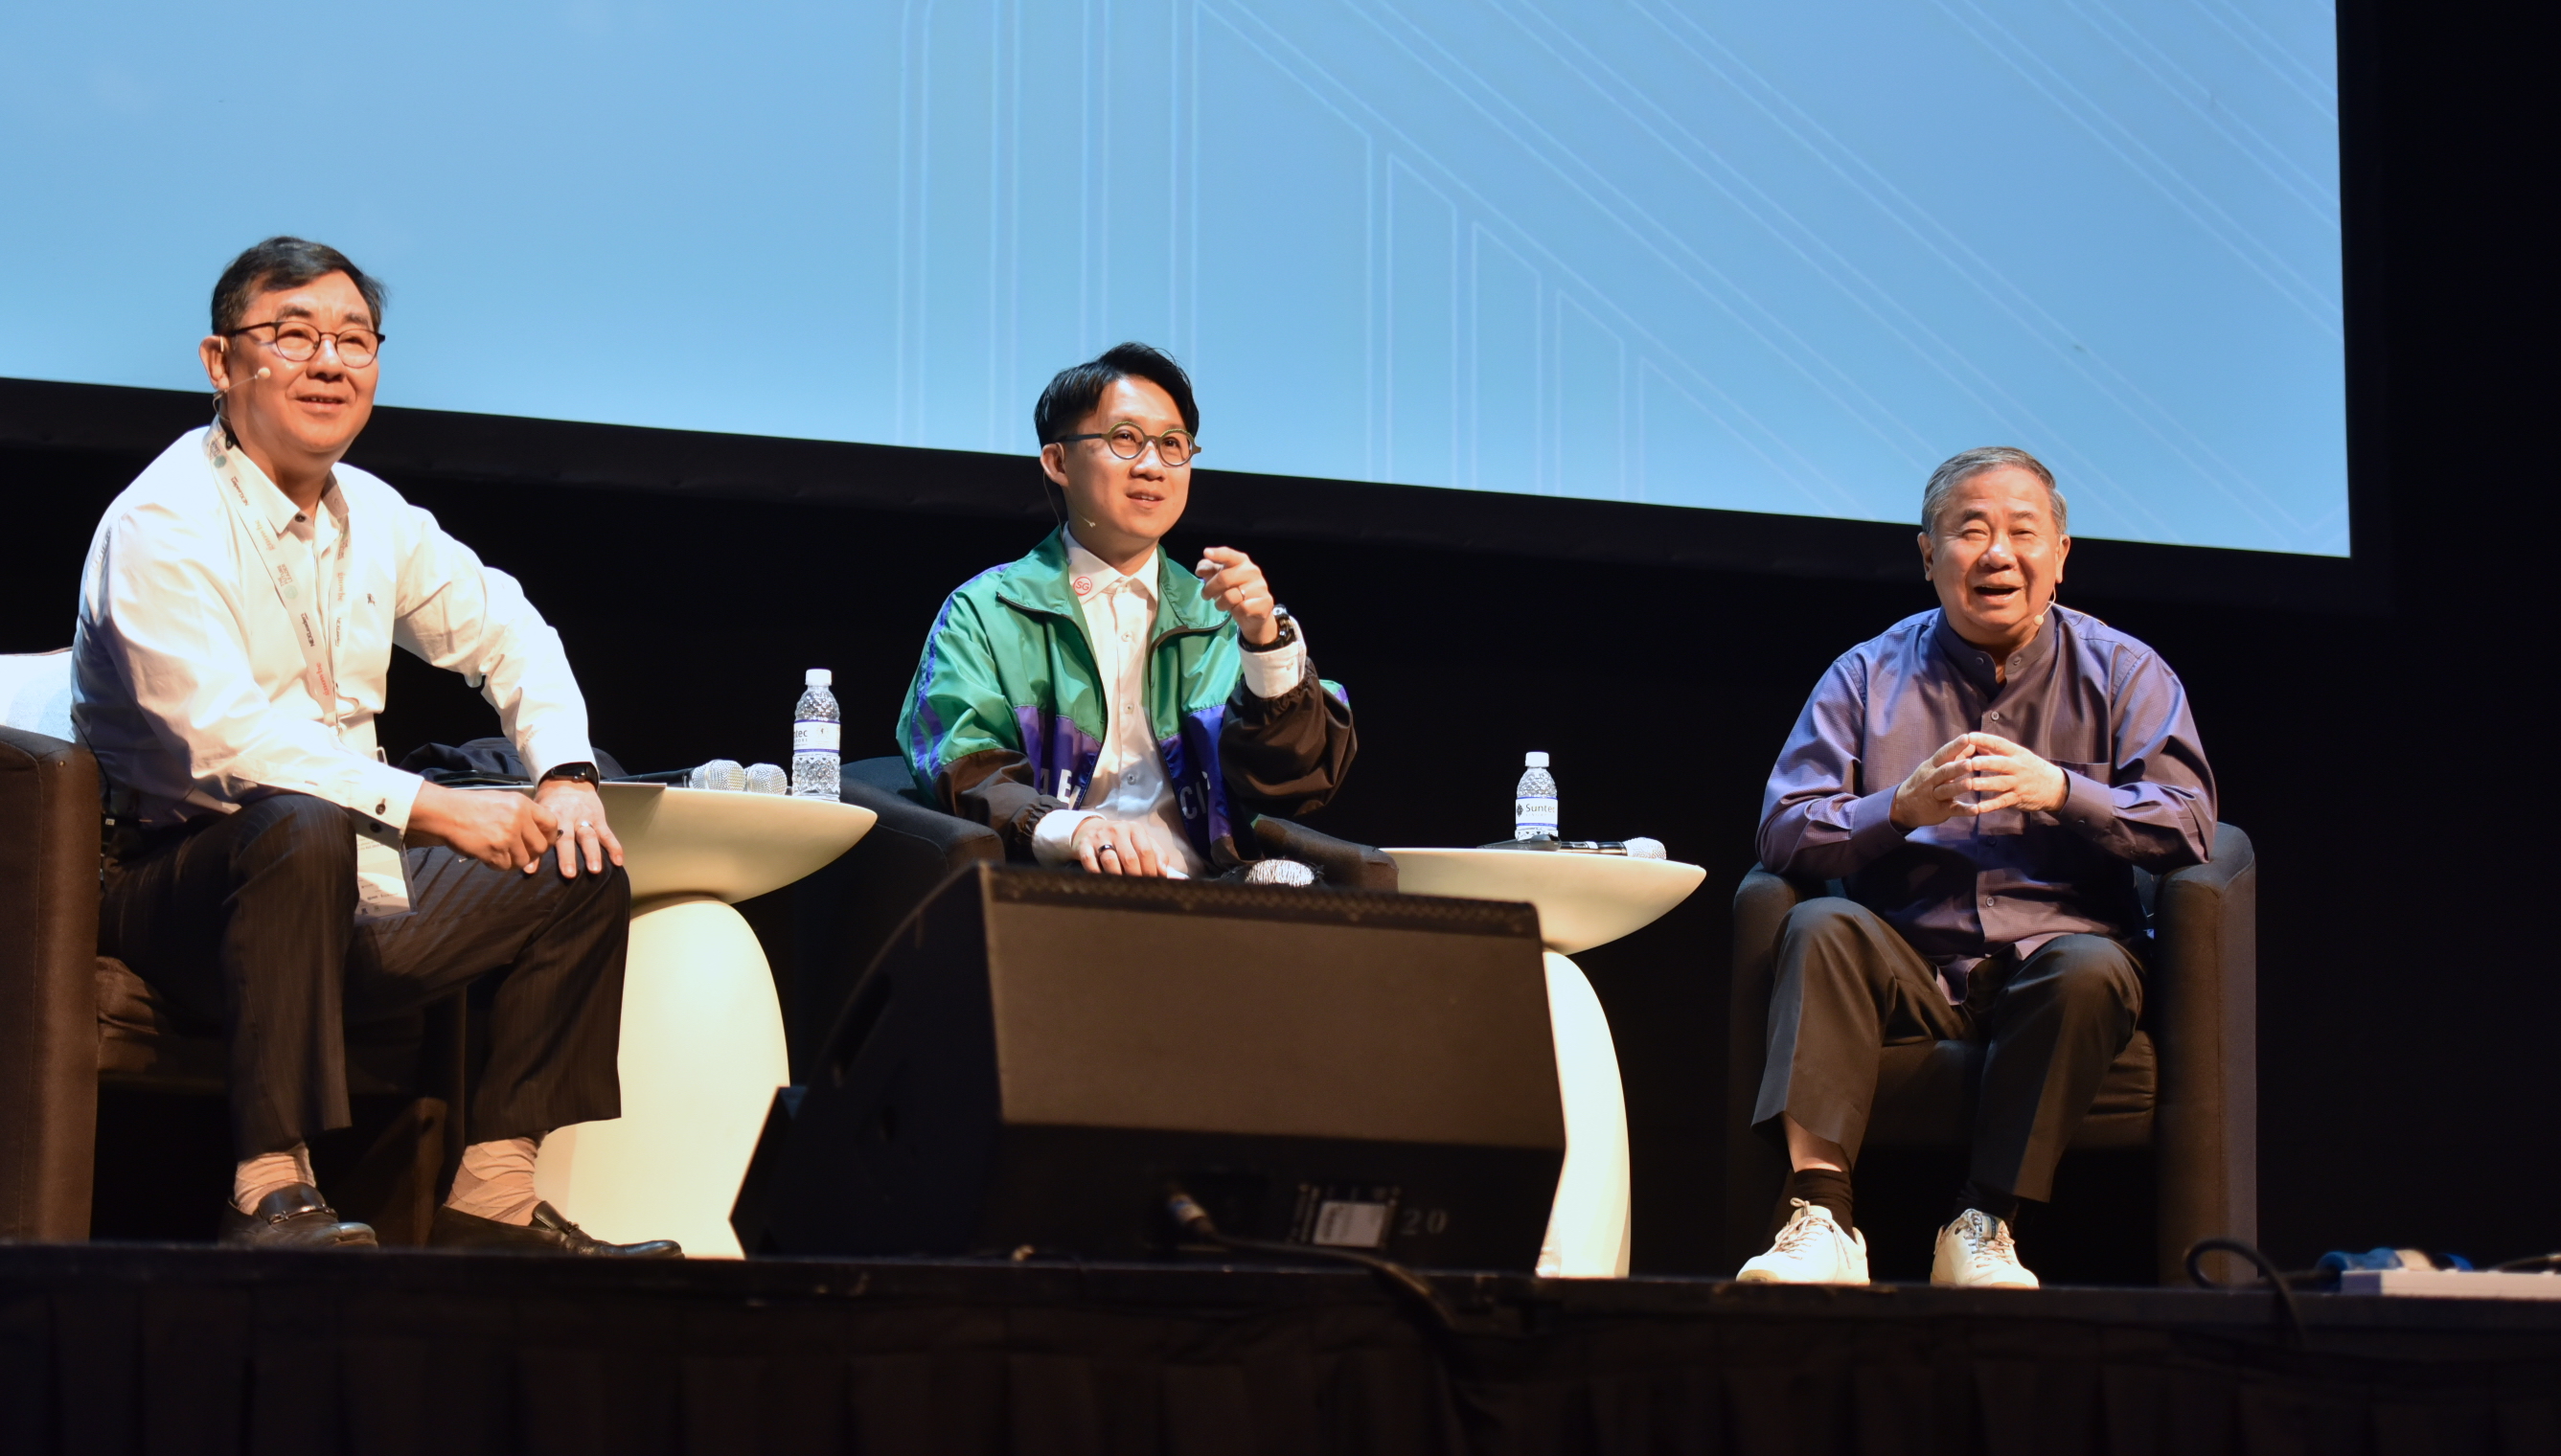 Dr Freddy Boey, Jeff Cheong and moderator, John Ng (from right to left) at the plenary dialogue of the 2019 Eagles Leadership Conference. (Photo courtesy of ELC Media Team)